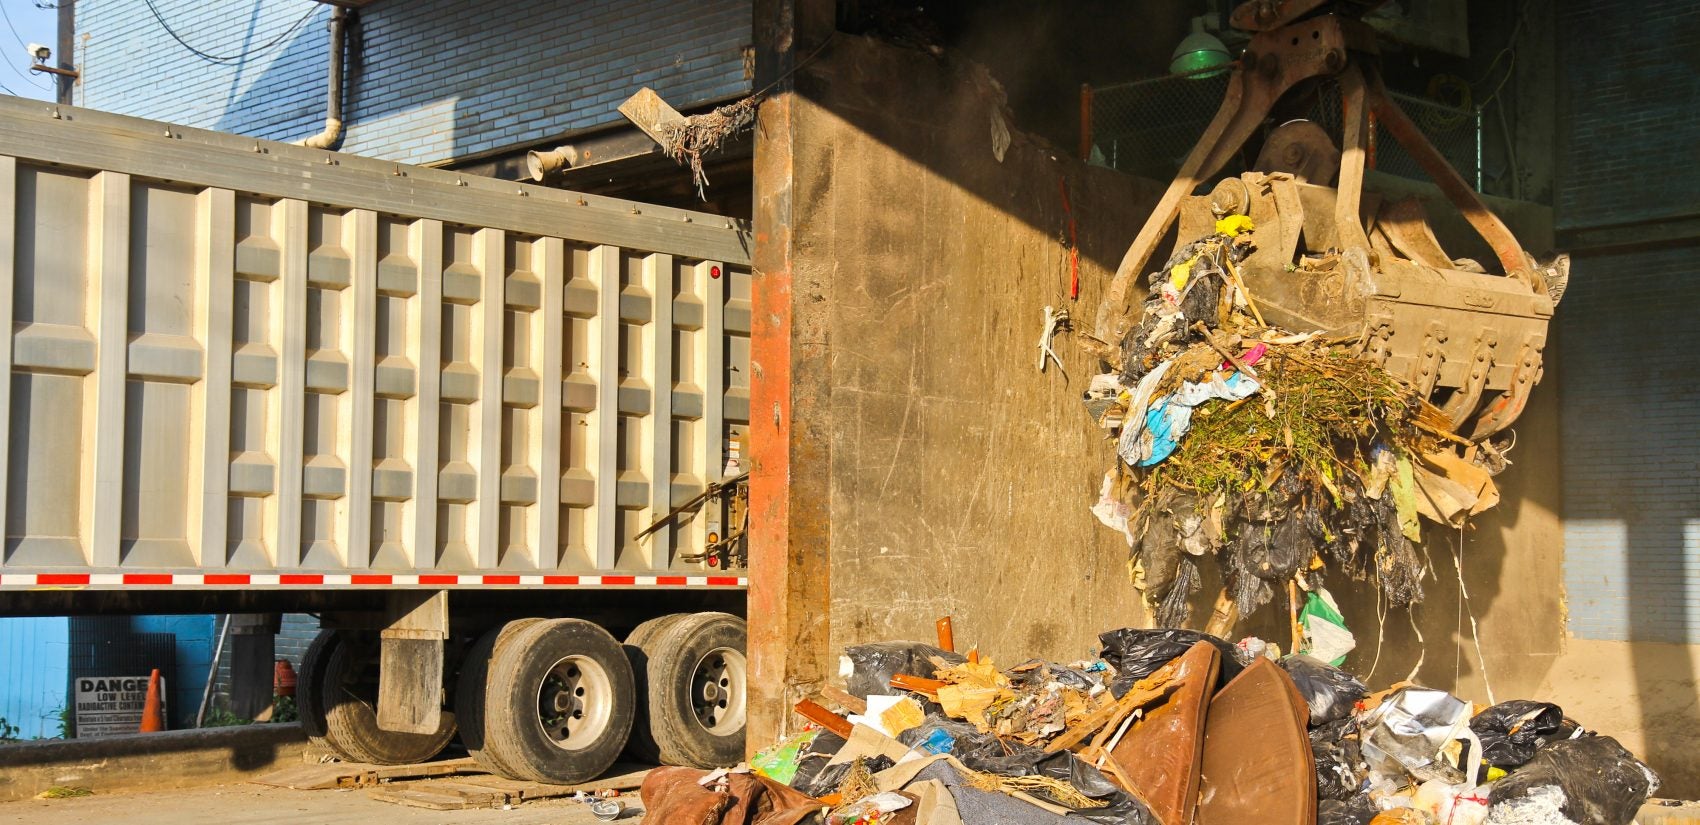 A claw grabs trash at the Northwest Transfer Station in Roxborough. (Kimberly Paynter/WHYY)